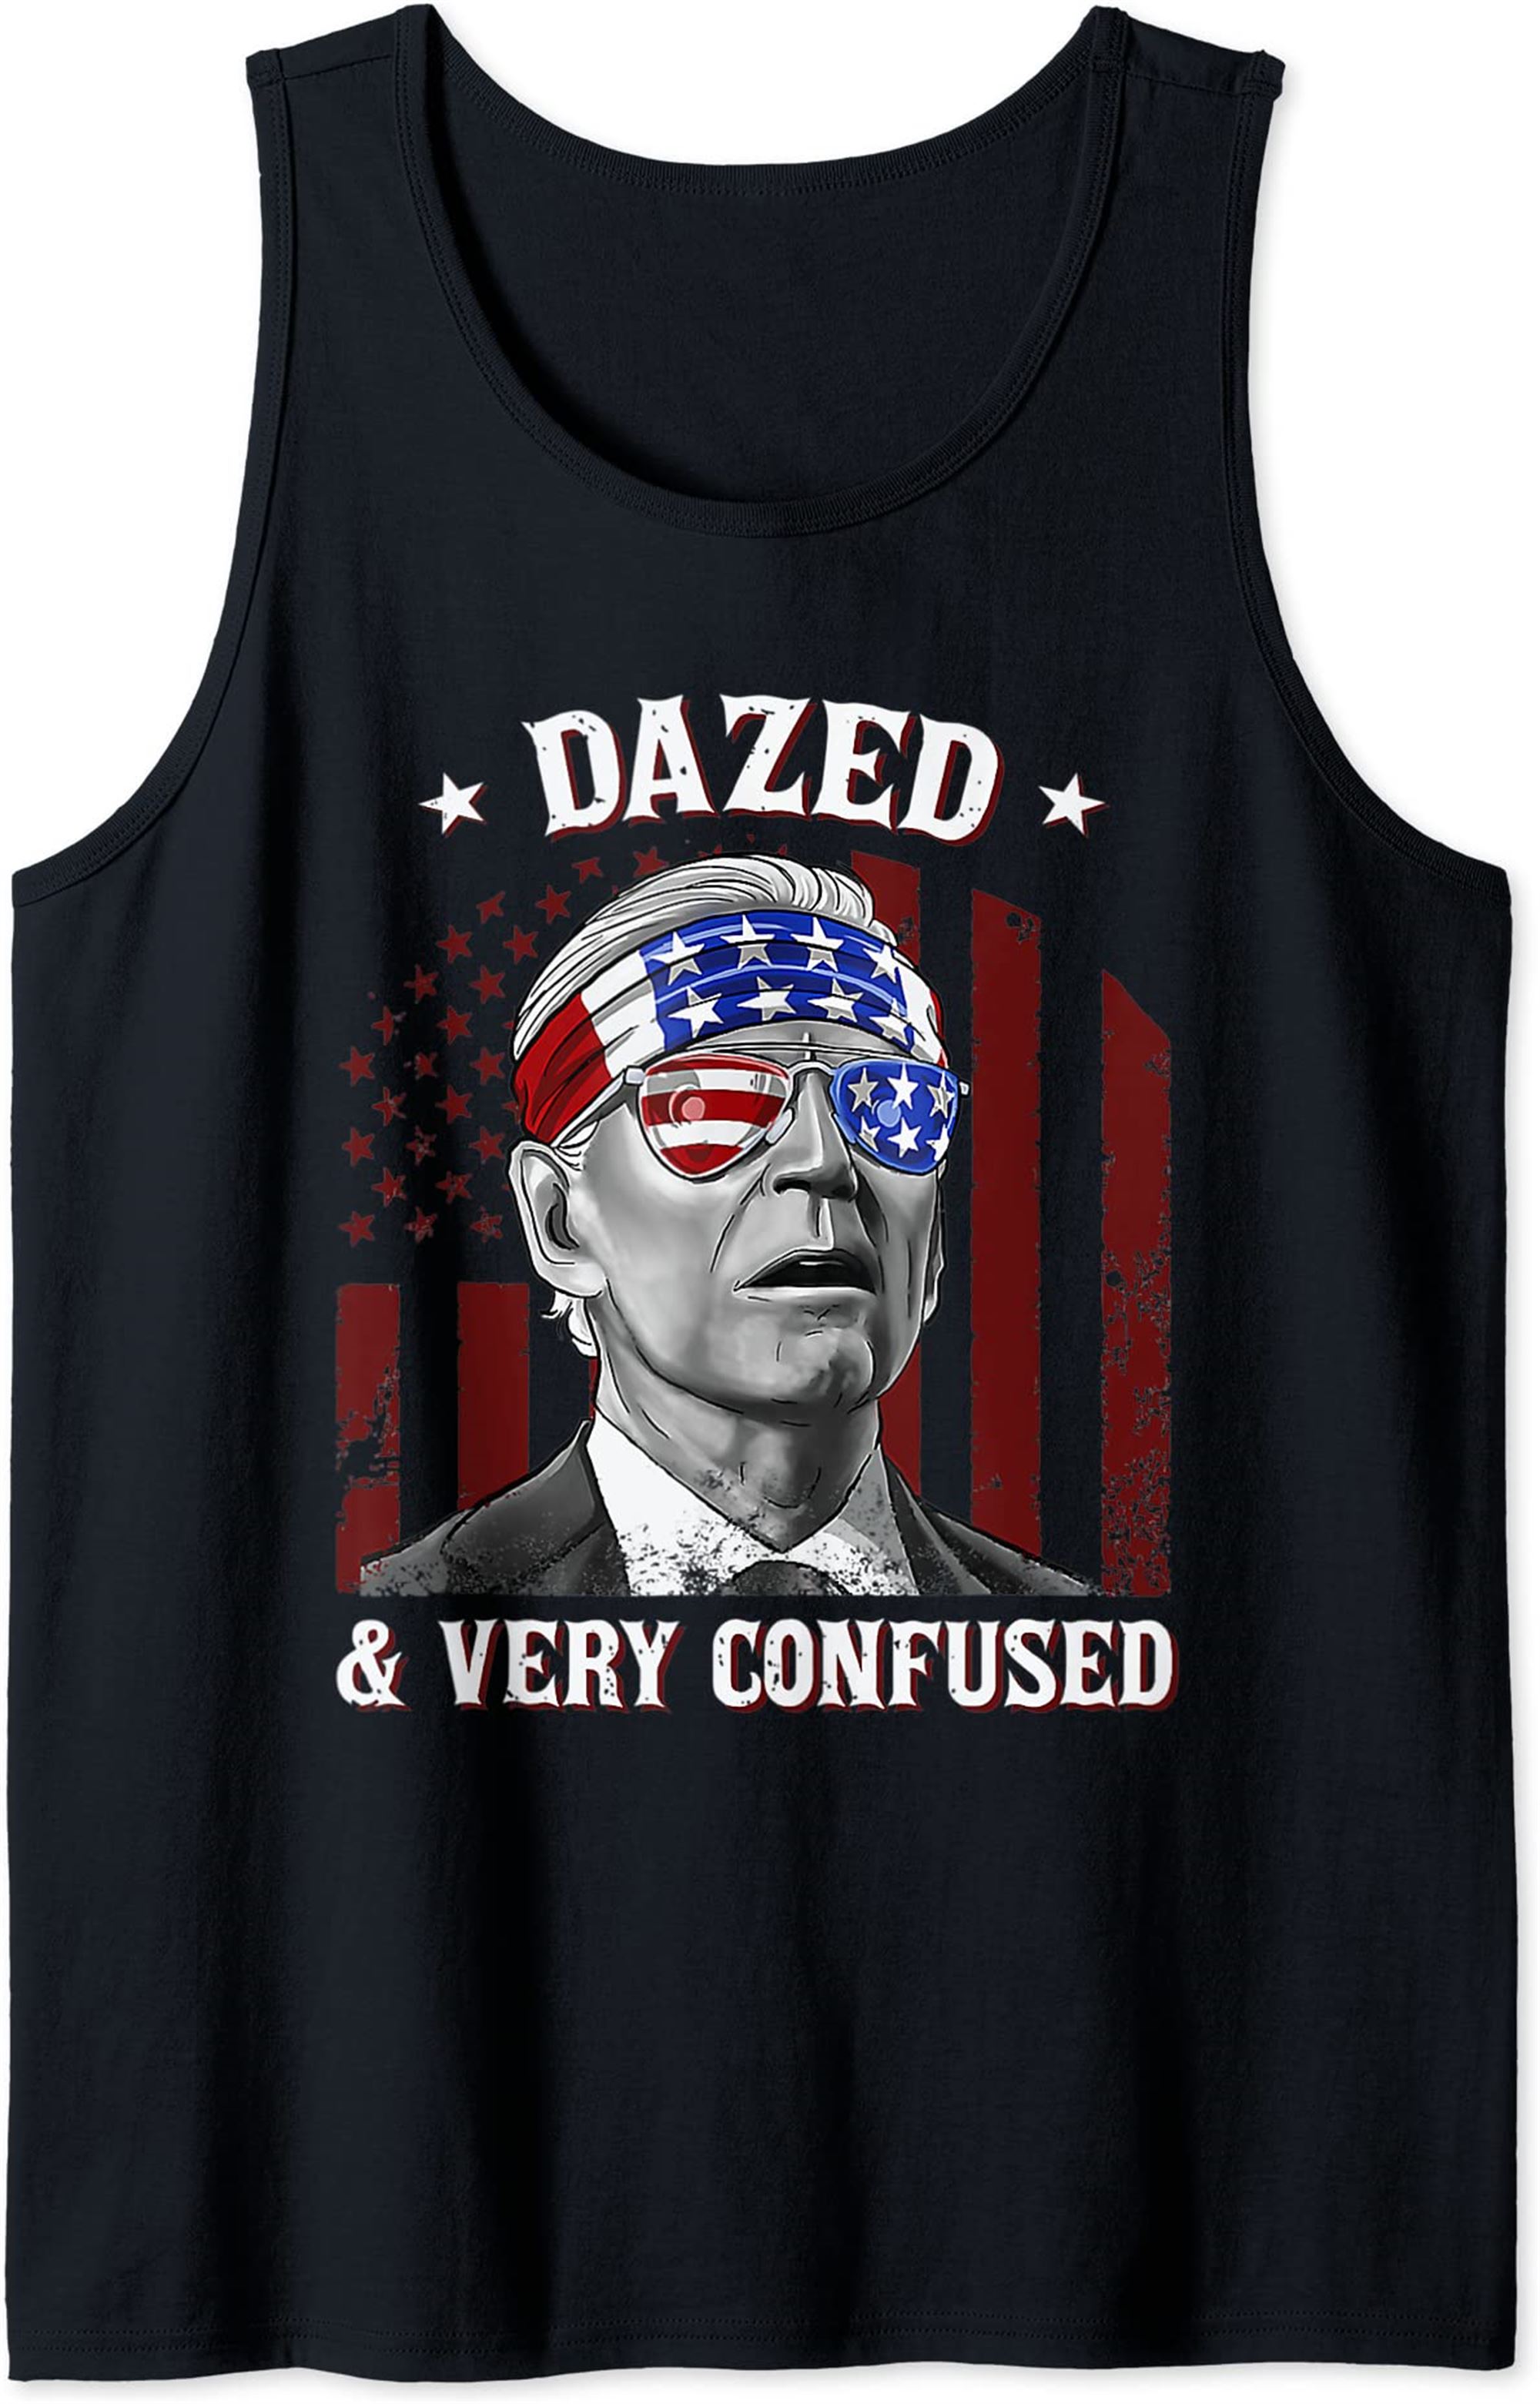 Funny Joe Biden Dazed And Very Confused 4th Of July 2022 Tank Top Full Size Up To 5xl